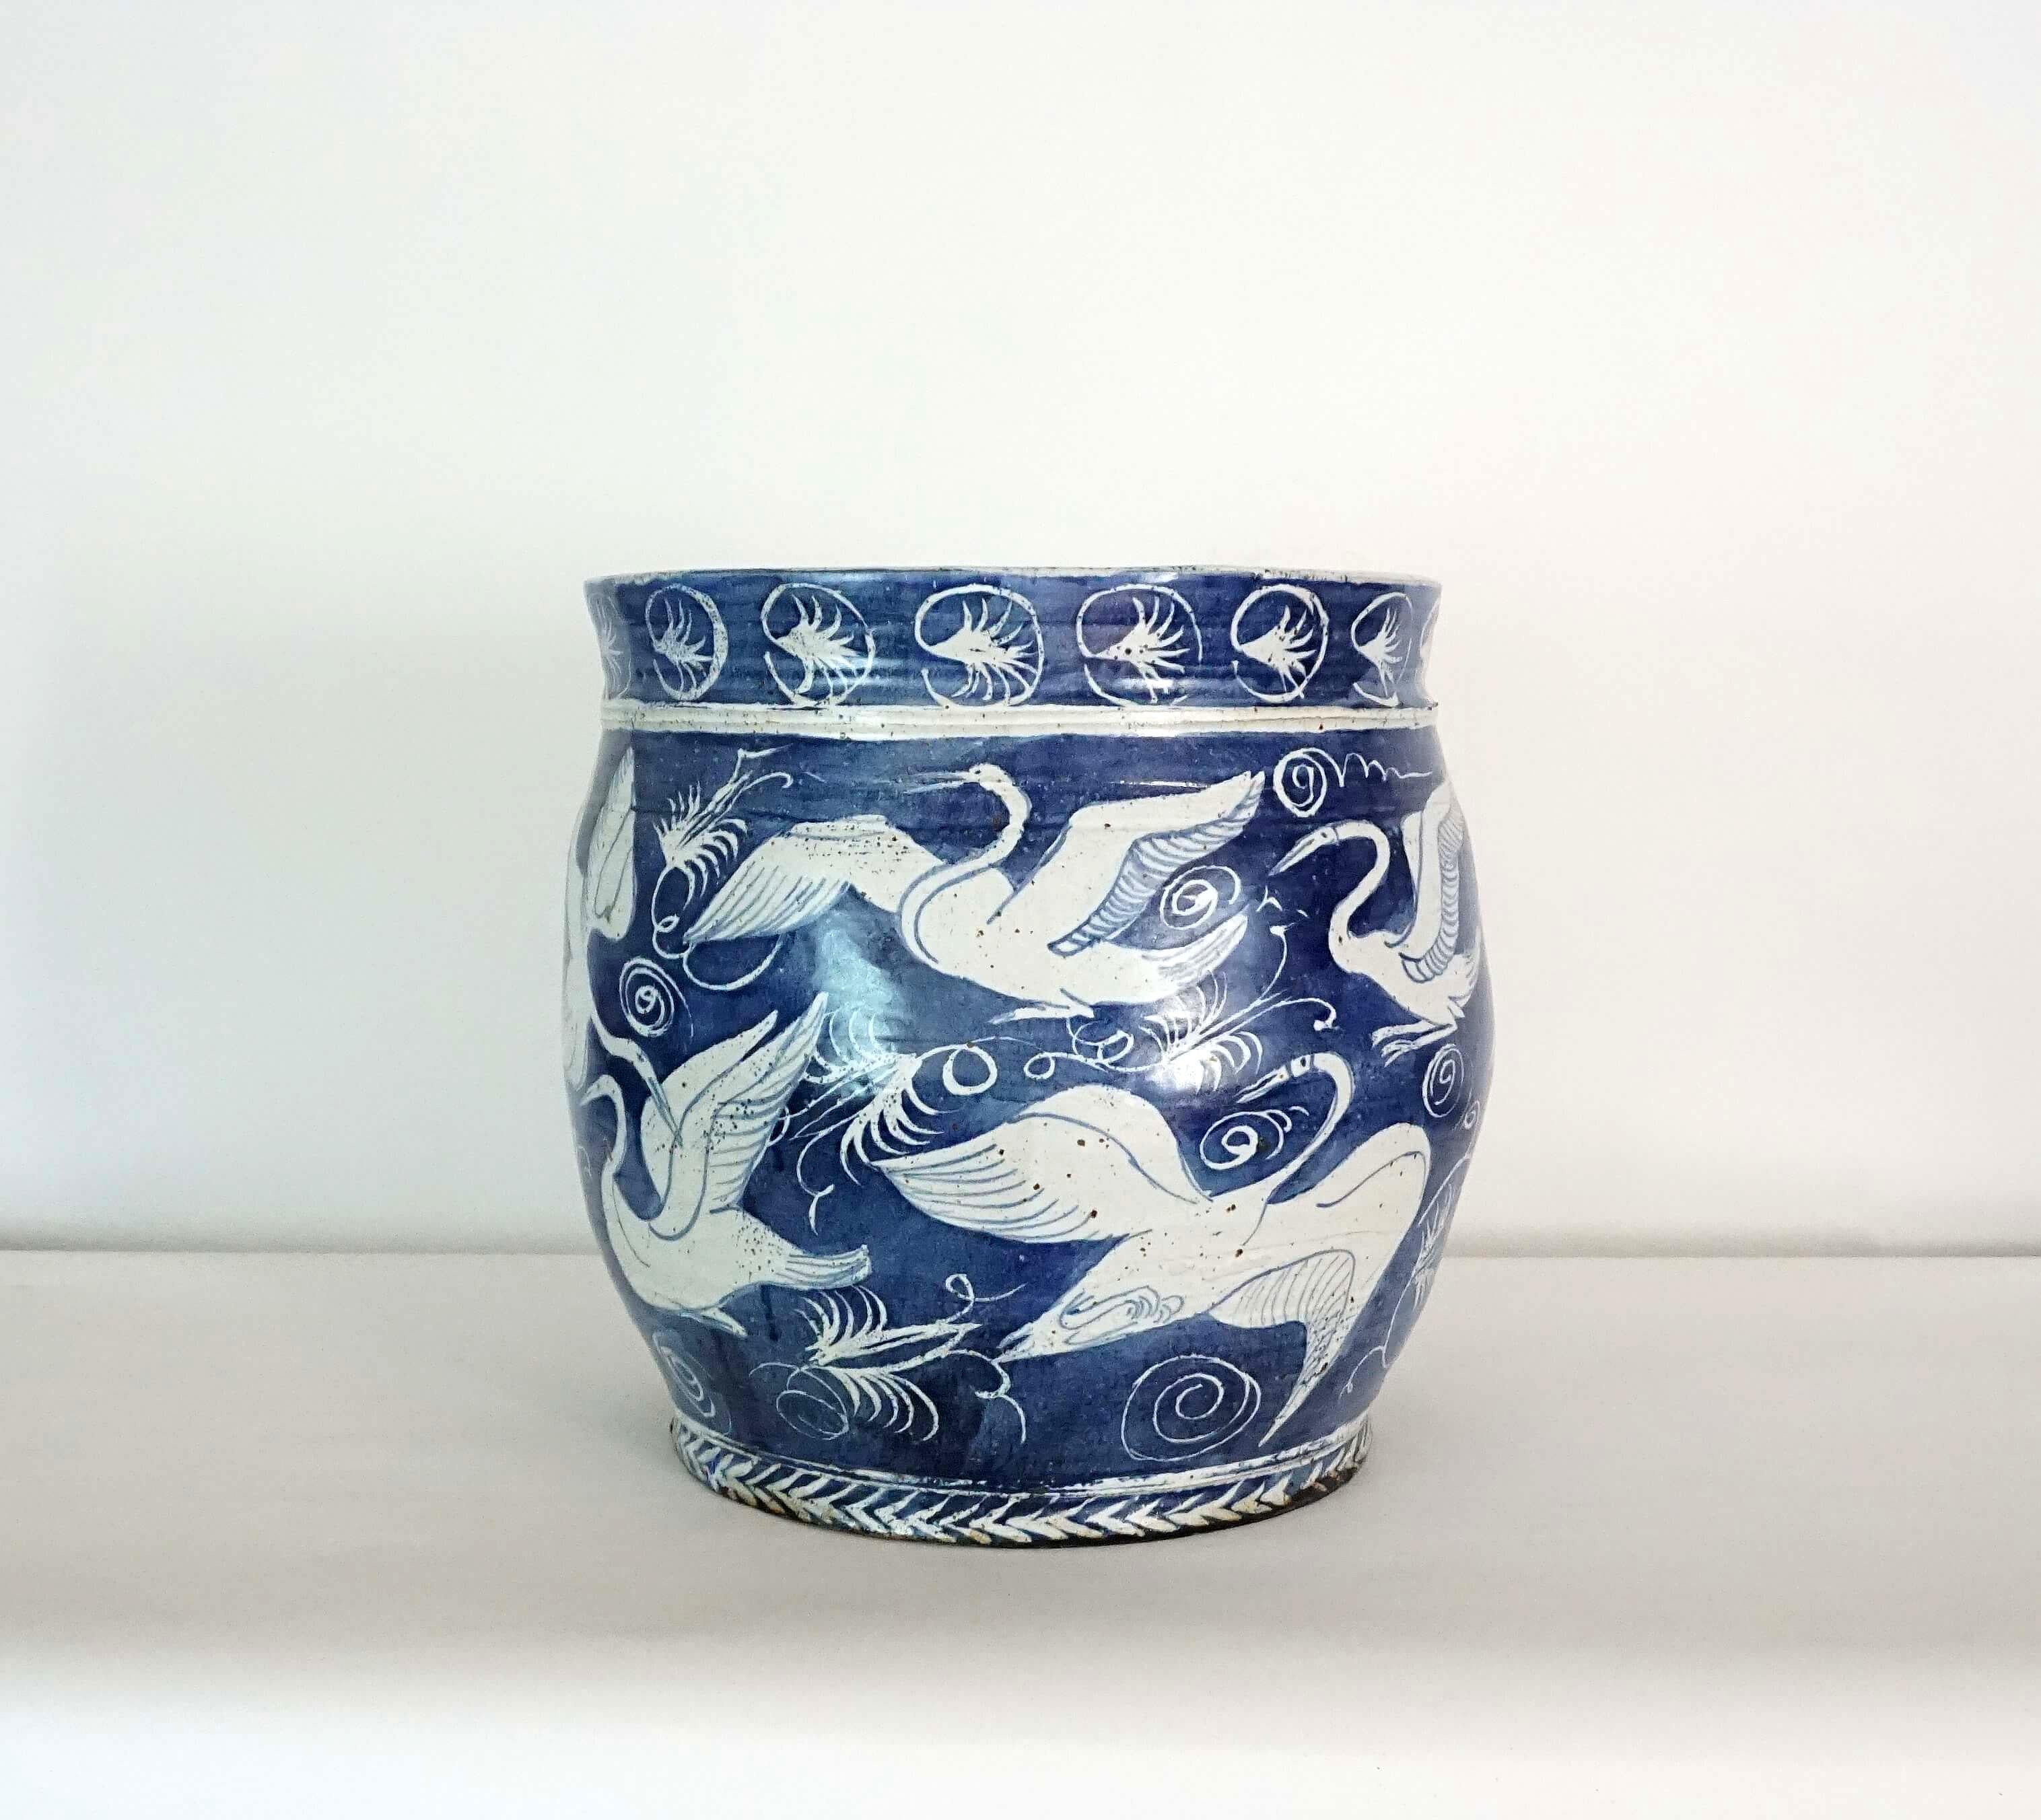 Late 20th Century Large Blue and White Fishbowl form Planter or Jardinière, M. Jay Lindsay, 1979